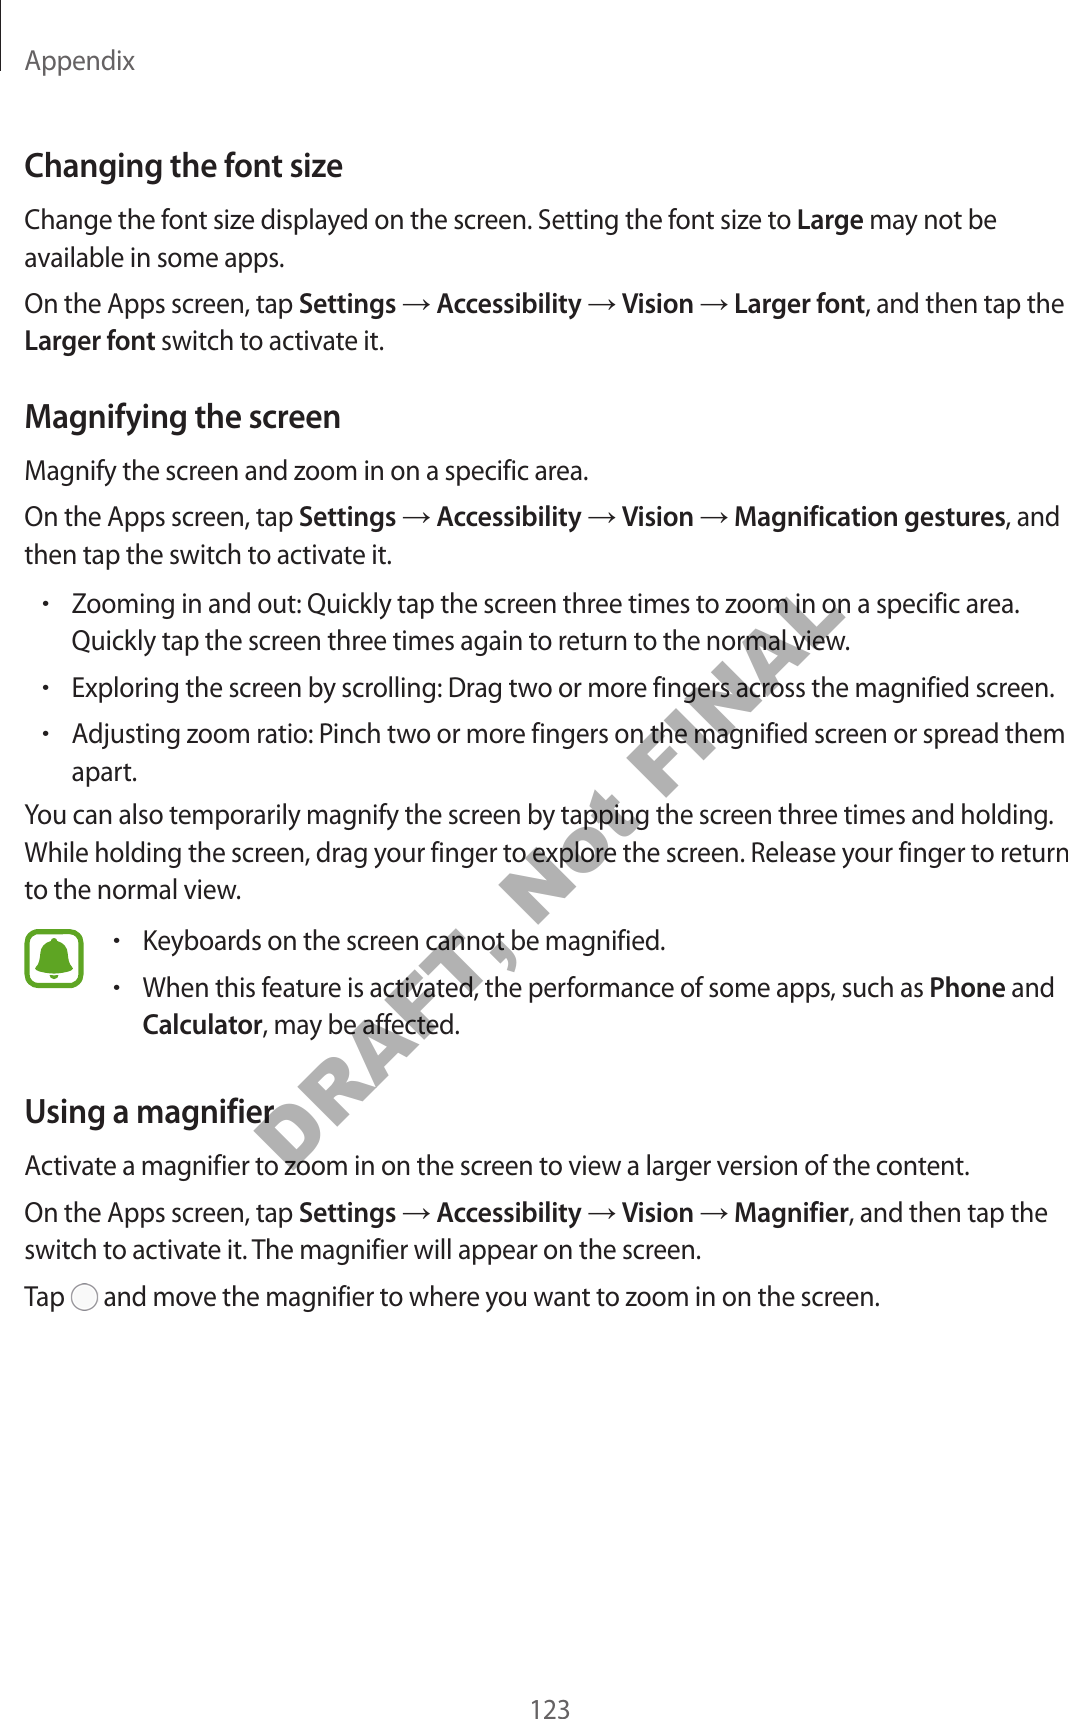 Appendix123Changing the font sizeChange the font size displayed on the screen. Setting the font size to Large may not be available in some apps.On the Apps screen, tap Settings ĺ Accessibility ĺ Vision ĺ Larger font, and then tap the Larger font switch to activate it.Magnifying the screenMagnify the screen and zoom in on a specific area.On the Apps screen, tap Settings ĺ Accessibility ĺ Vision ĺ Magnification gestures, and then tap the switch to activate it.•Zooming in and out: Quickly tap the screen three times to zoom in on a specific area. Quickly tap the screen three times again to return to the normal view.•Exploring the screen by scrolling: Drag two or more fingers across the magnified screen.•Adjusting zoom ratio: Pinch two or more fingers on the magnified screen or spread them apart.You can also temporarily magnify the screen by tapping the screen three times and holding. While holding the screen, drag your finger to explore the screen. Release your finger to return to the normal view.•Keyboards on the screen cannot be magnified.•When this feature is activated, the performance of some apps, such as Phone and Calculator, may be affected.Using a magnifierActivate a magnifier to zoom in on the screen to view a larger version of the content.On the Apps screen, tap Settings ĺ Accessibility ĺ Vision ĺ Magnifier, and then tap the switch to activate it. The magnifier will appear on the screen.Tap   and move the magnifier to where you want to zoom in on the screen.DRAFT, Not FINAL